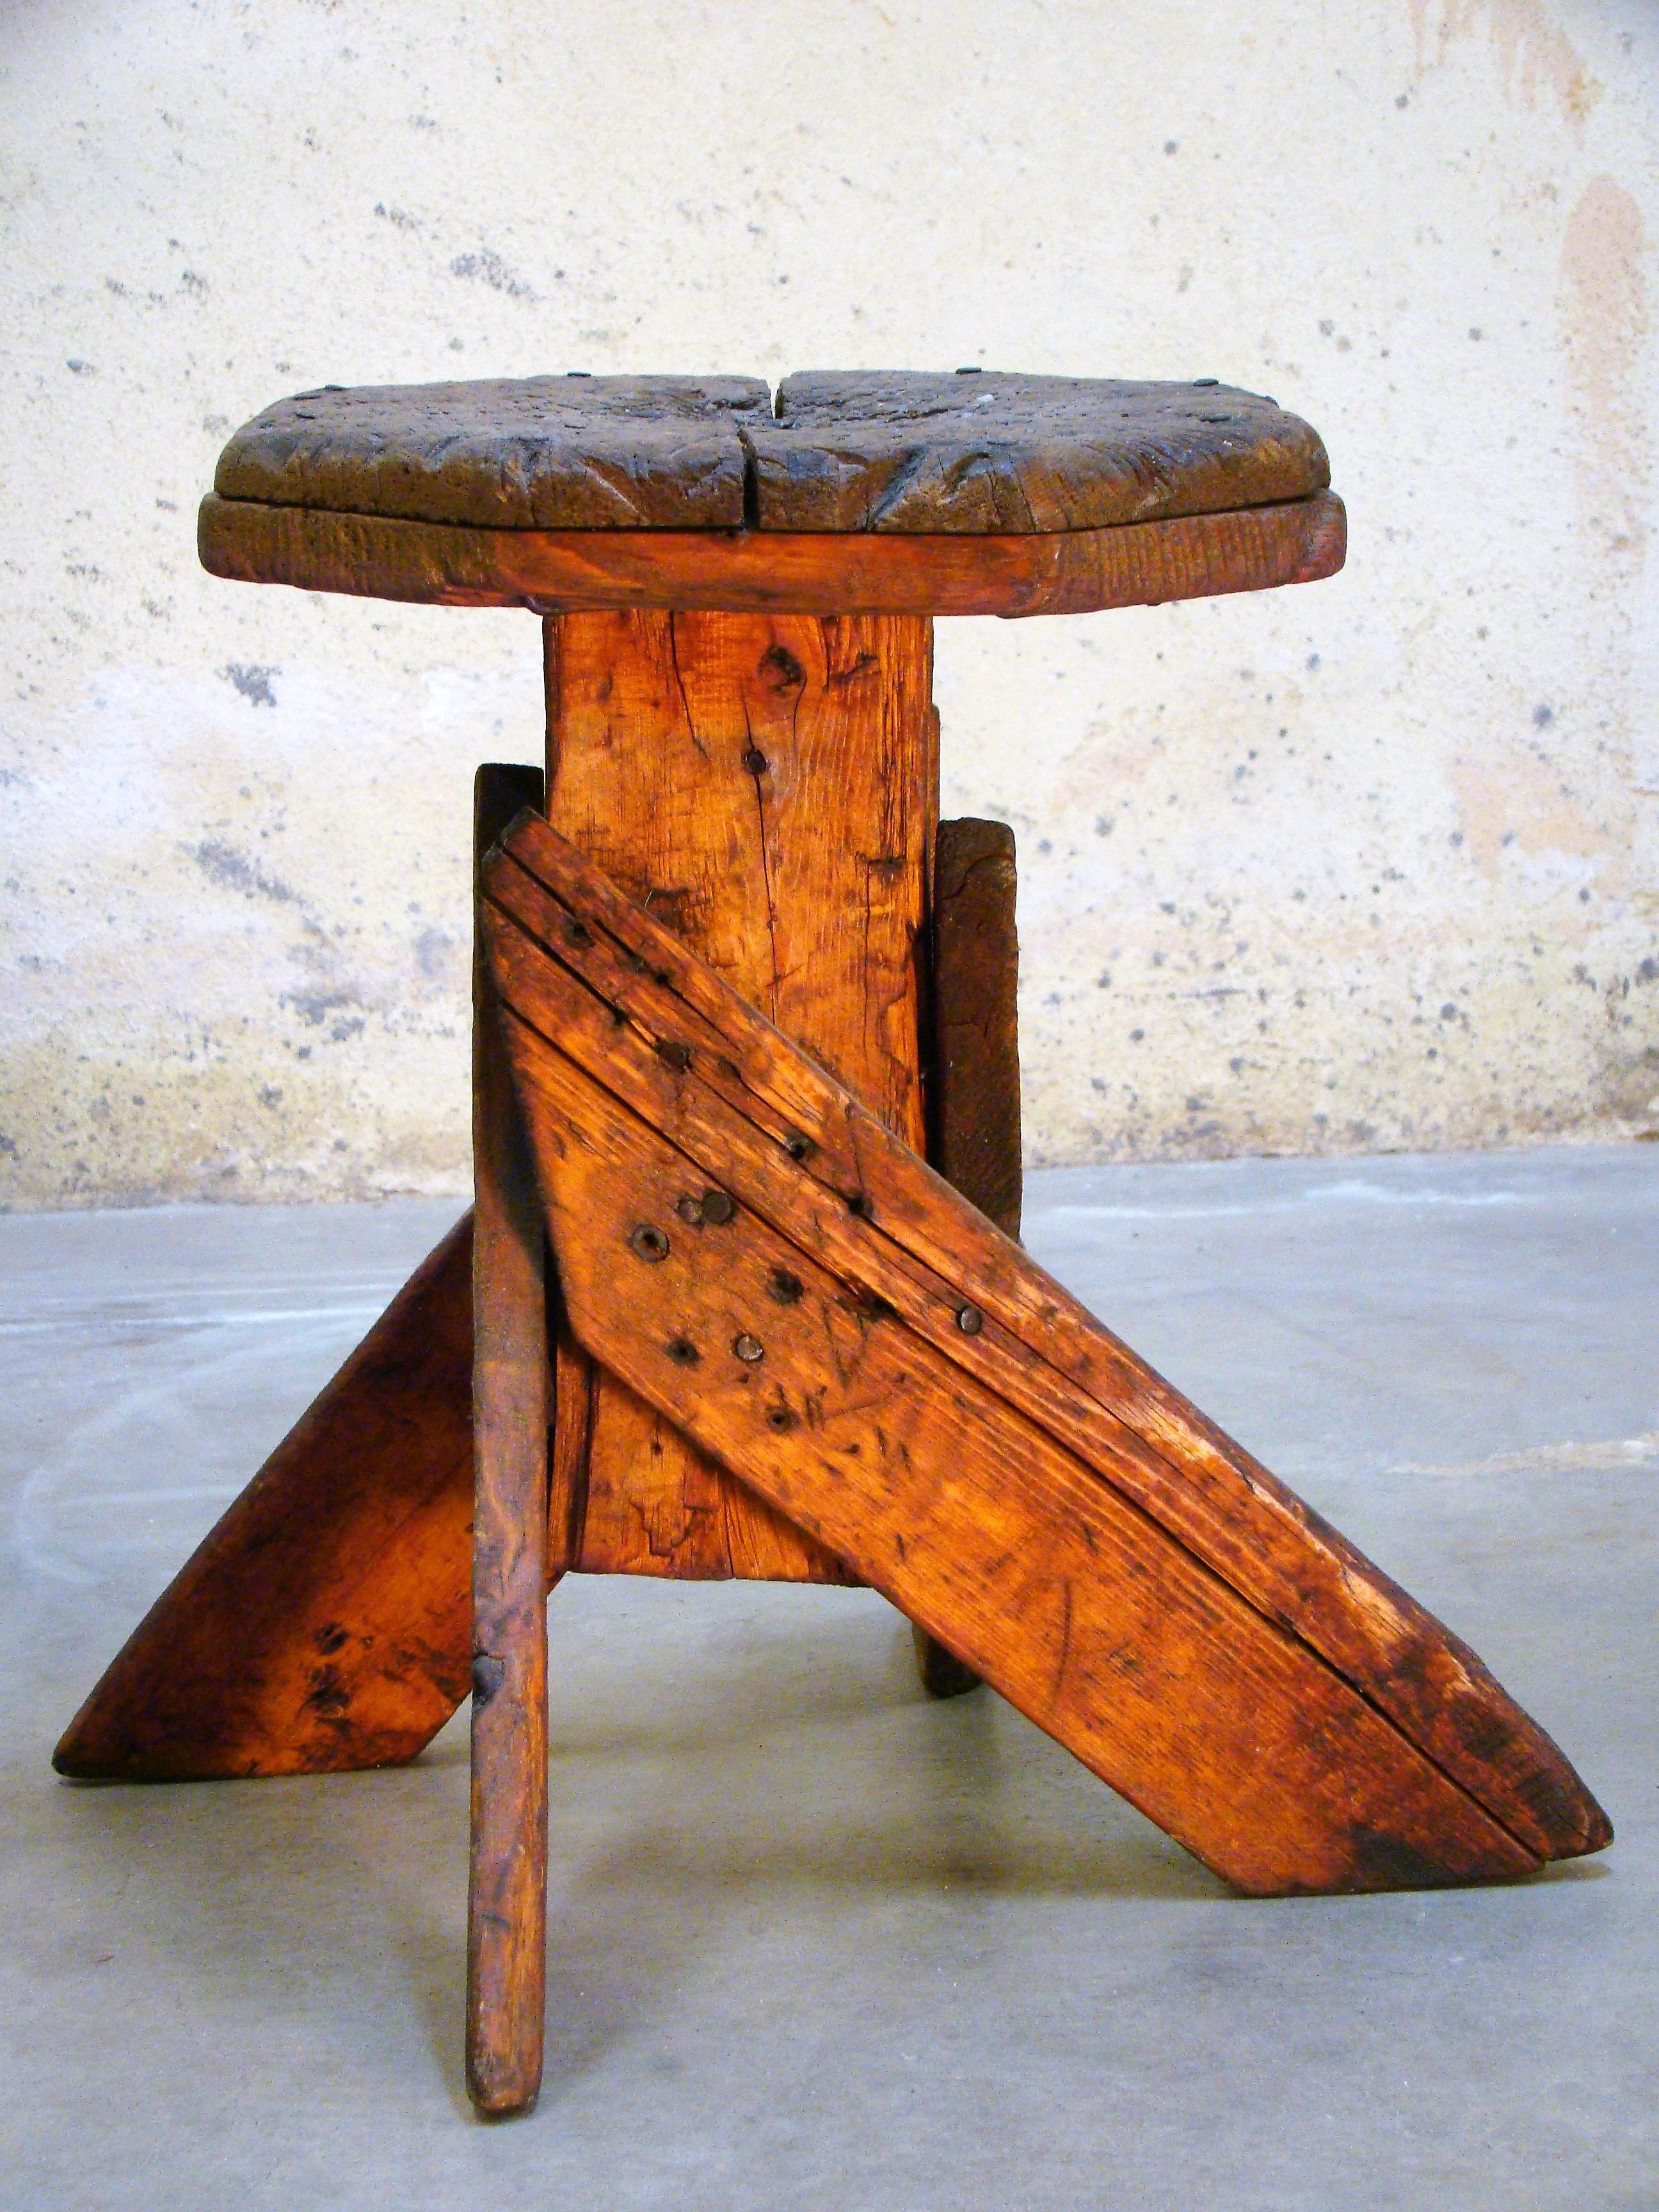 20th Century Antique Wooden Milking or Workmans Stool